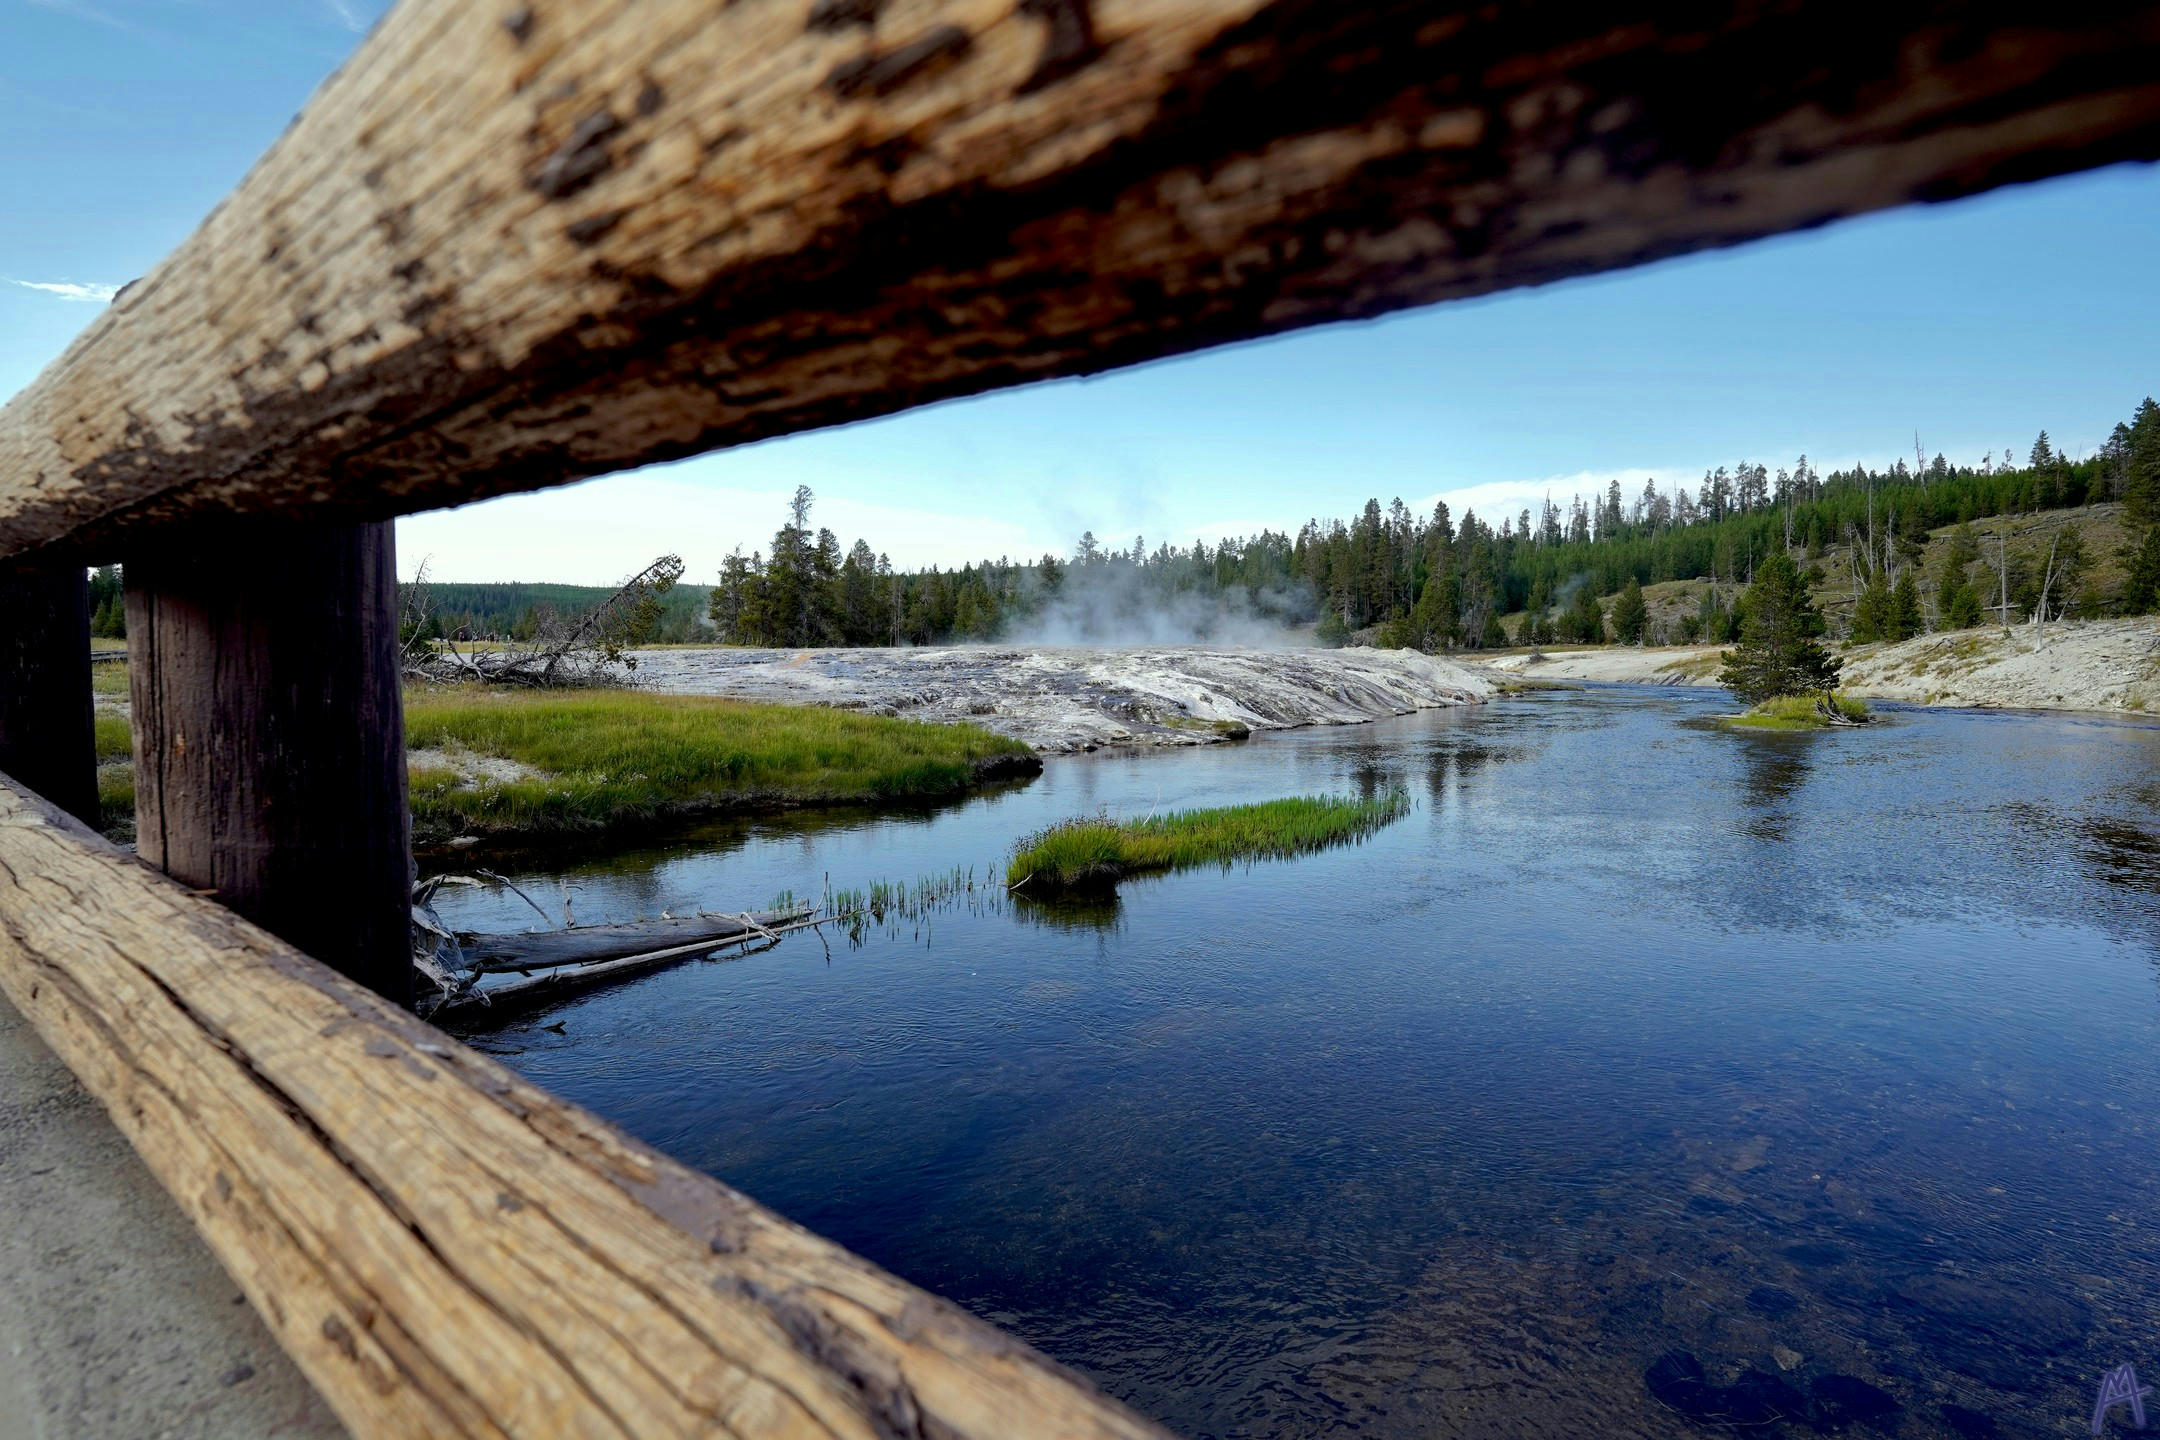 Deep blue water through log fence at Yellowstone